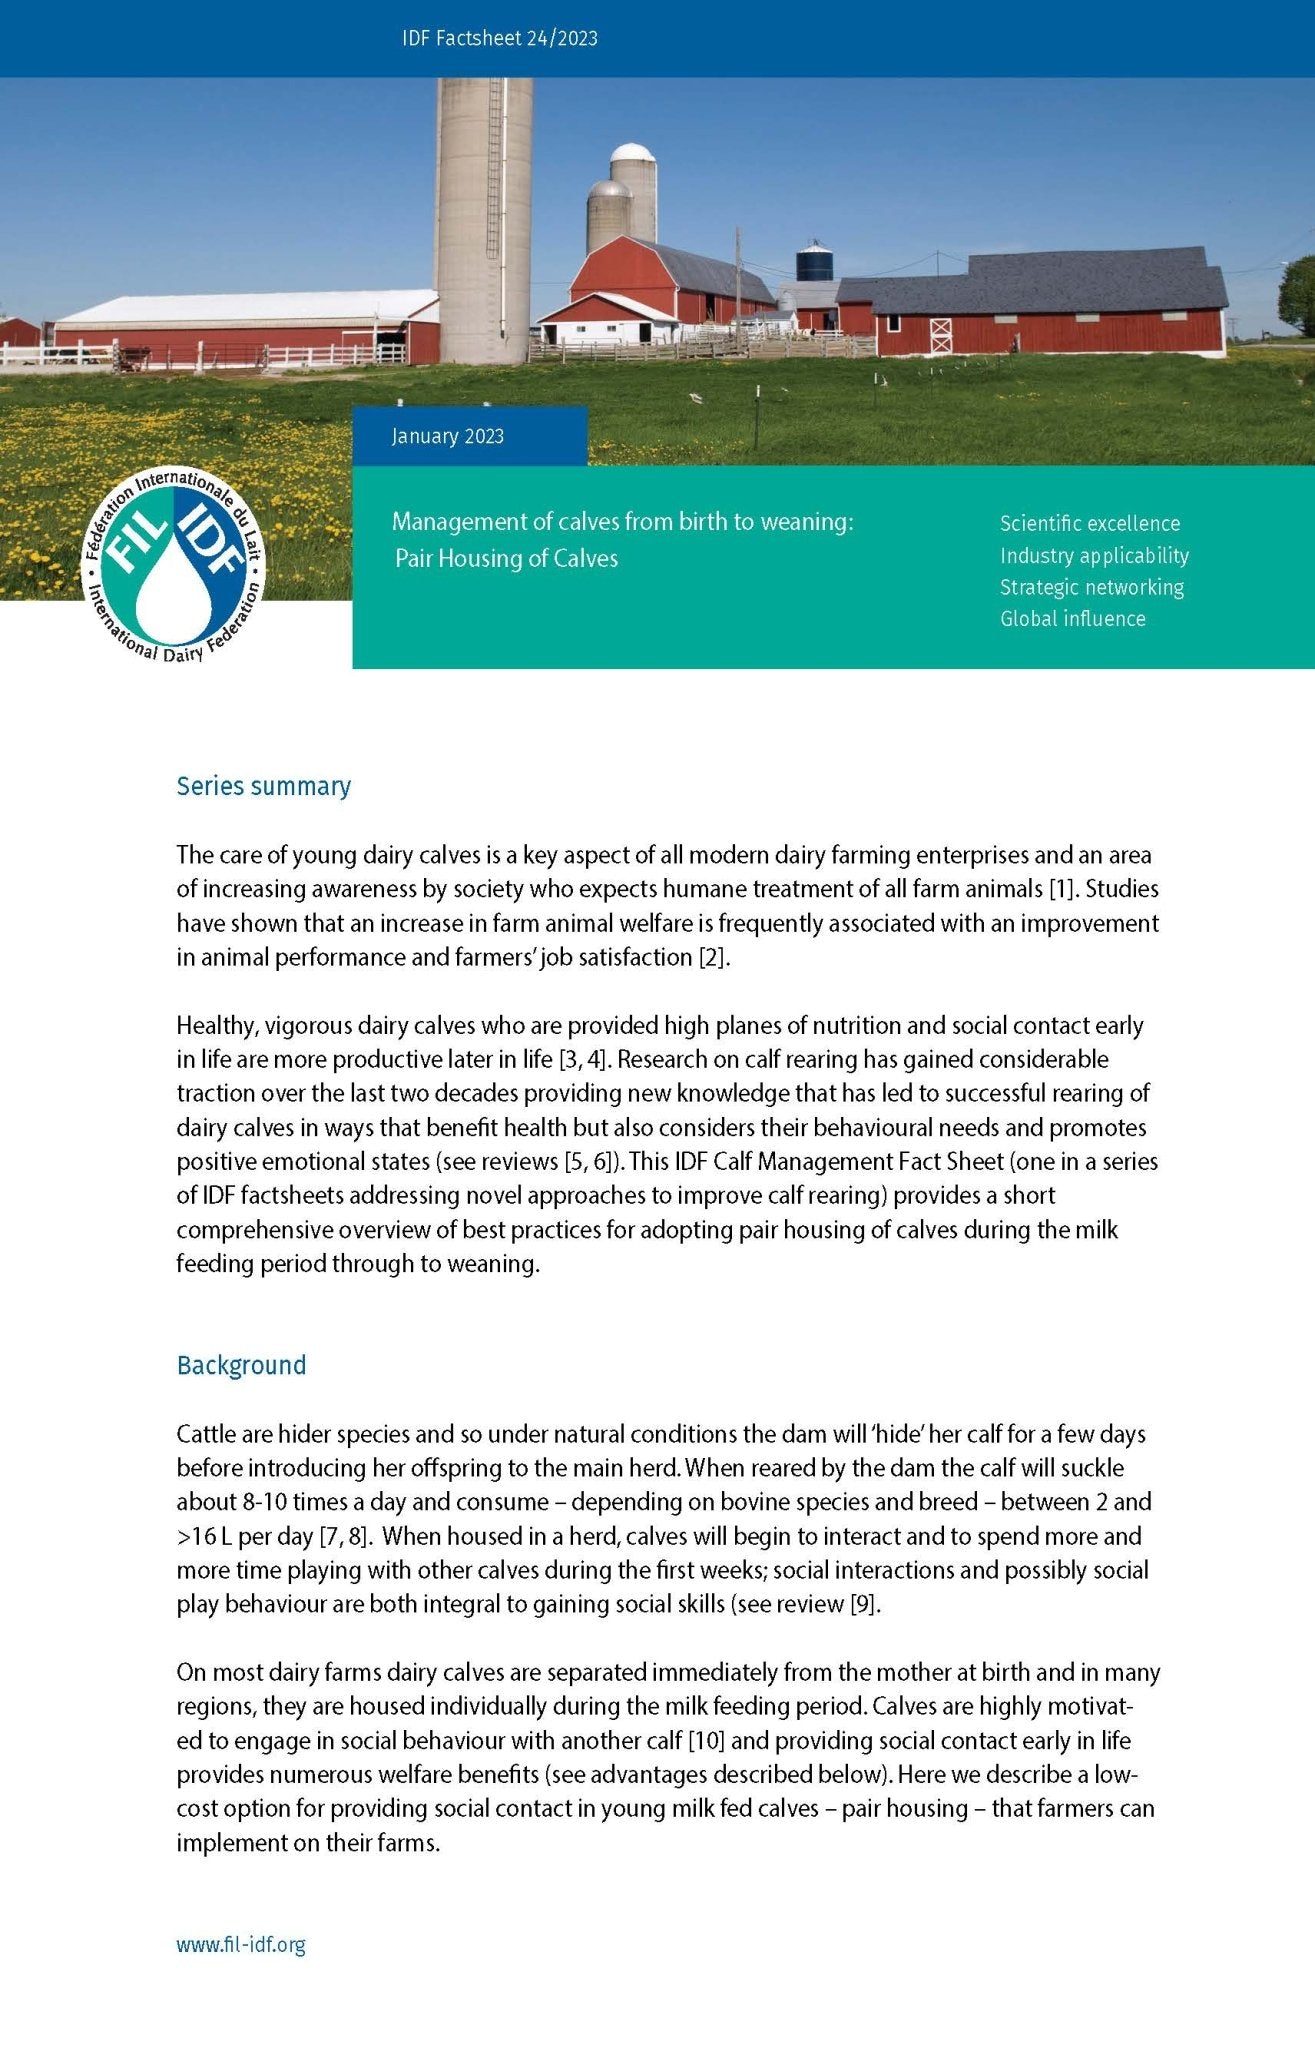 Factsheet of the IDF N° 24/ 2023: Management of calves from birth to weaning: Pair Housing of Calves - FIL-IDF